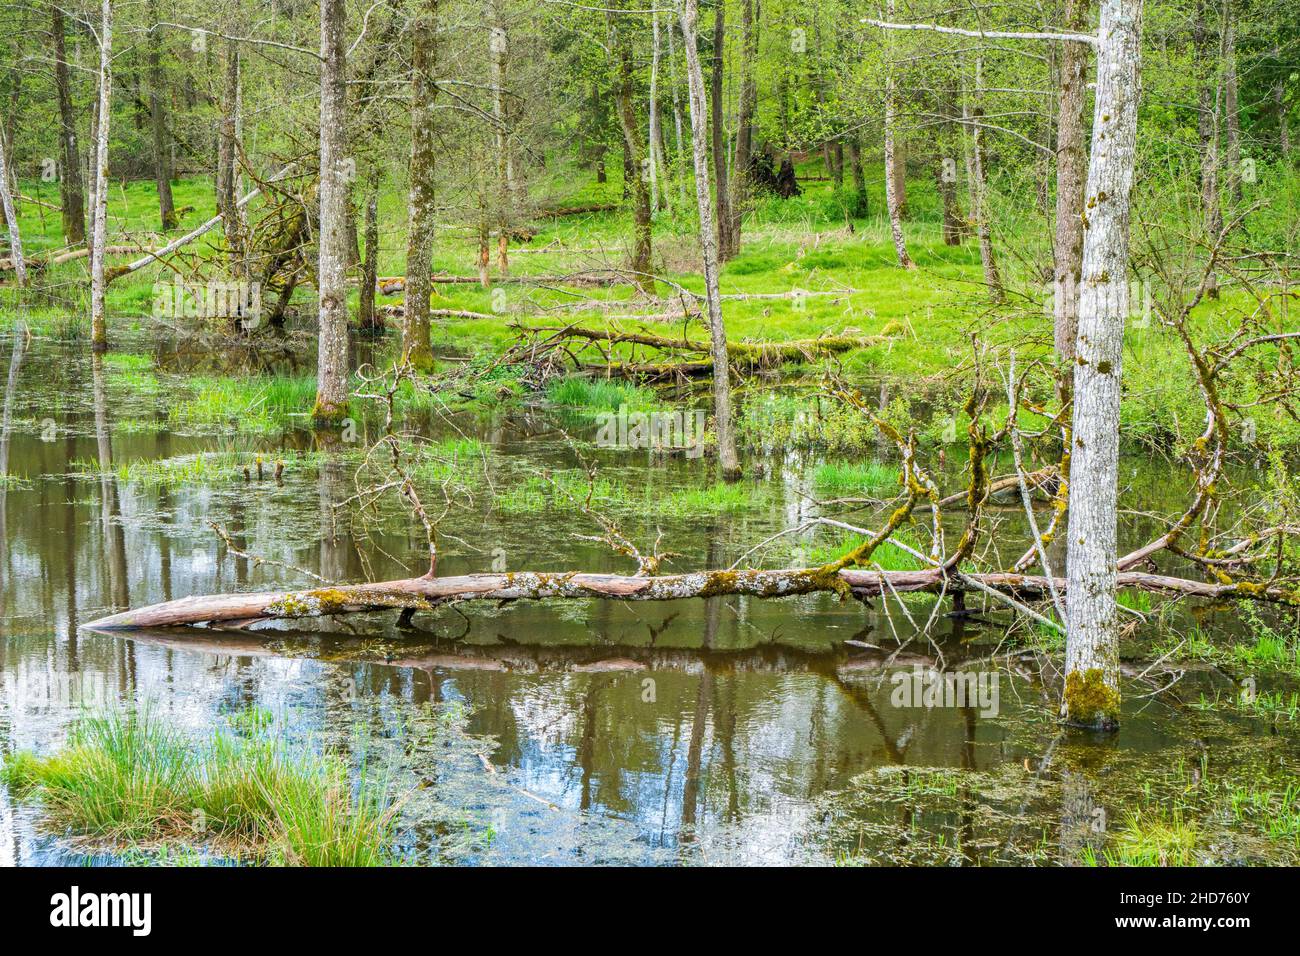 Biotope with tree stumps in the water. Stock Photo